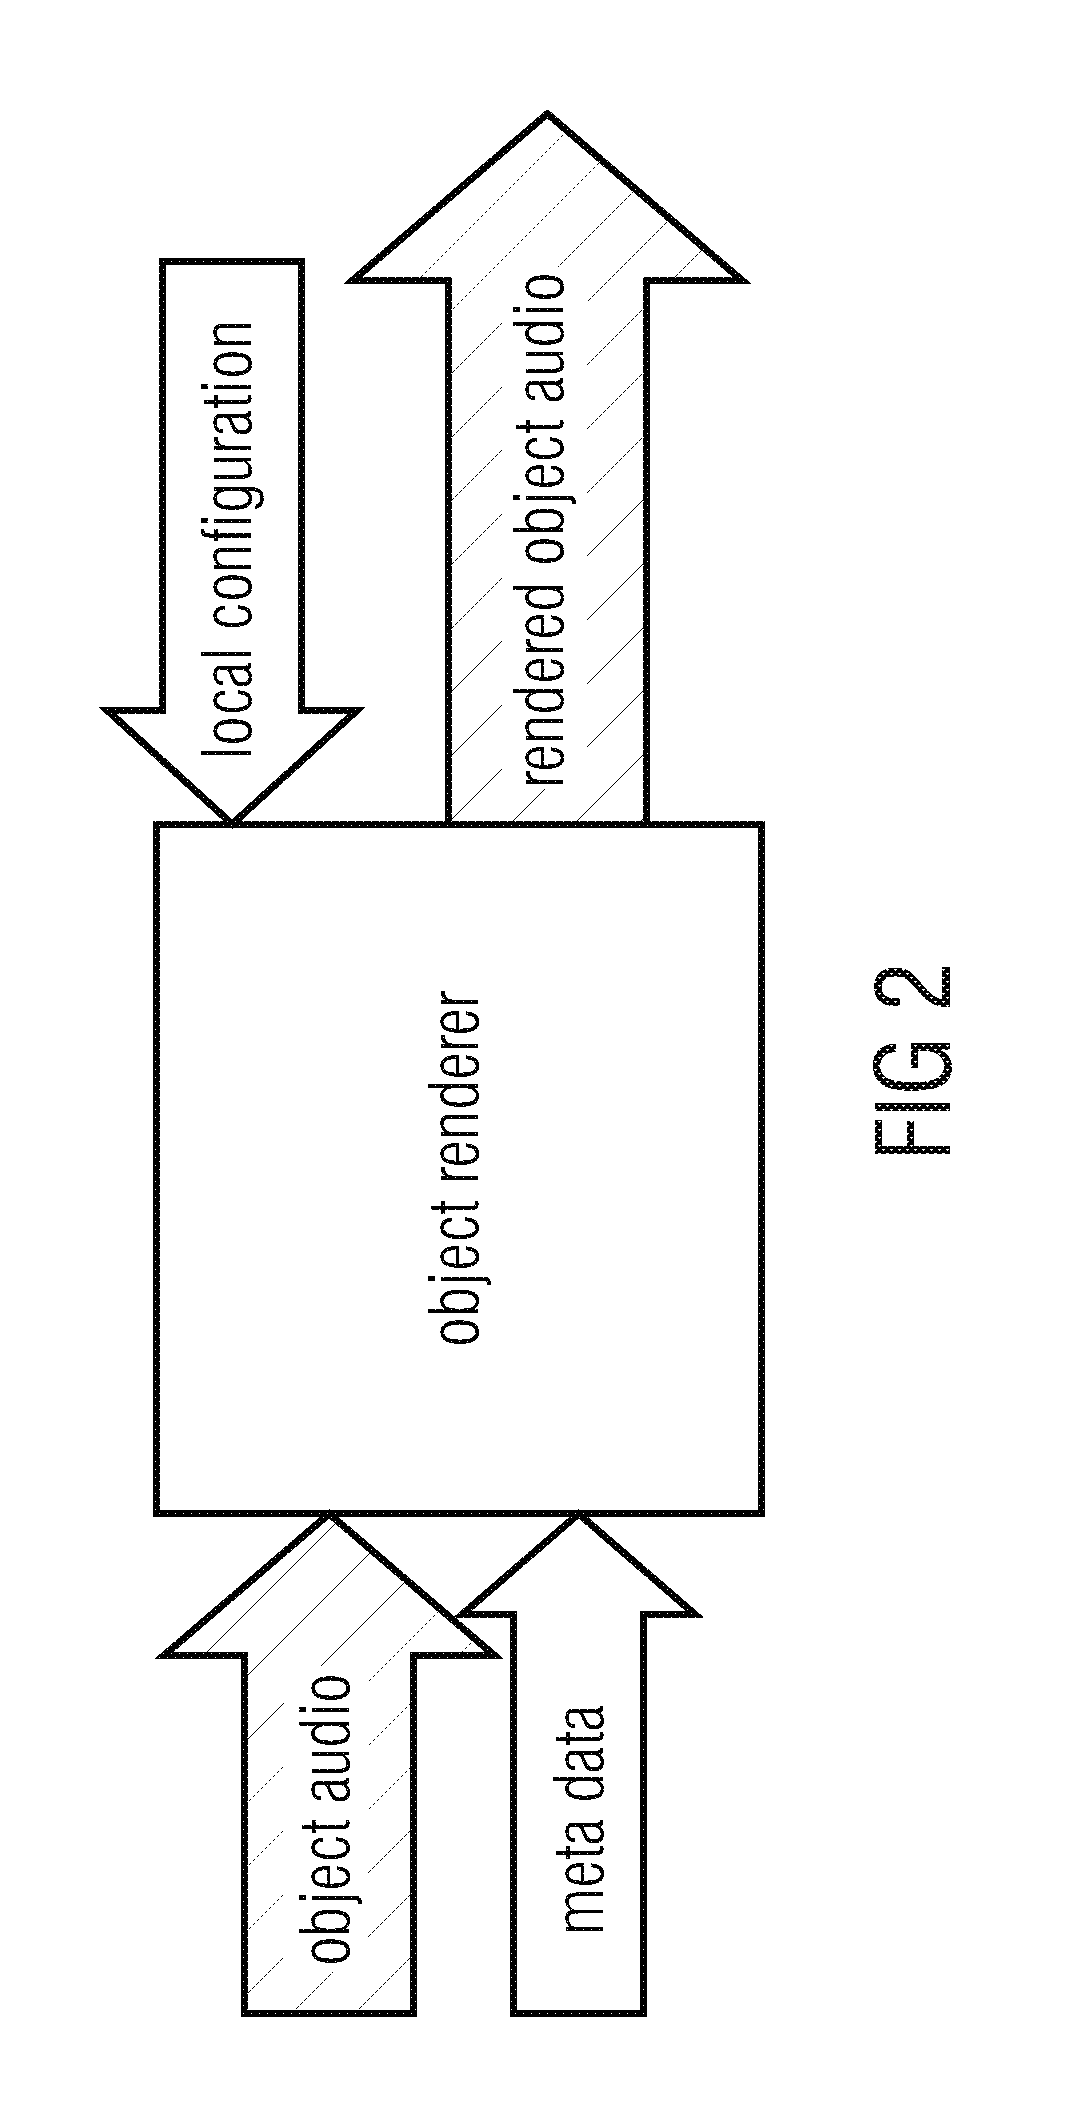 Apparatus and method for audio rendering employing a geometric distance definition